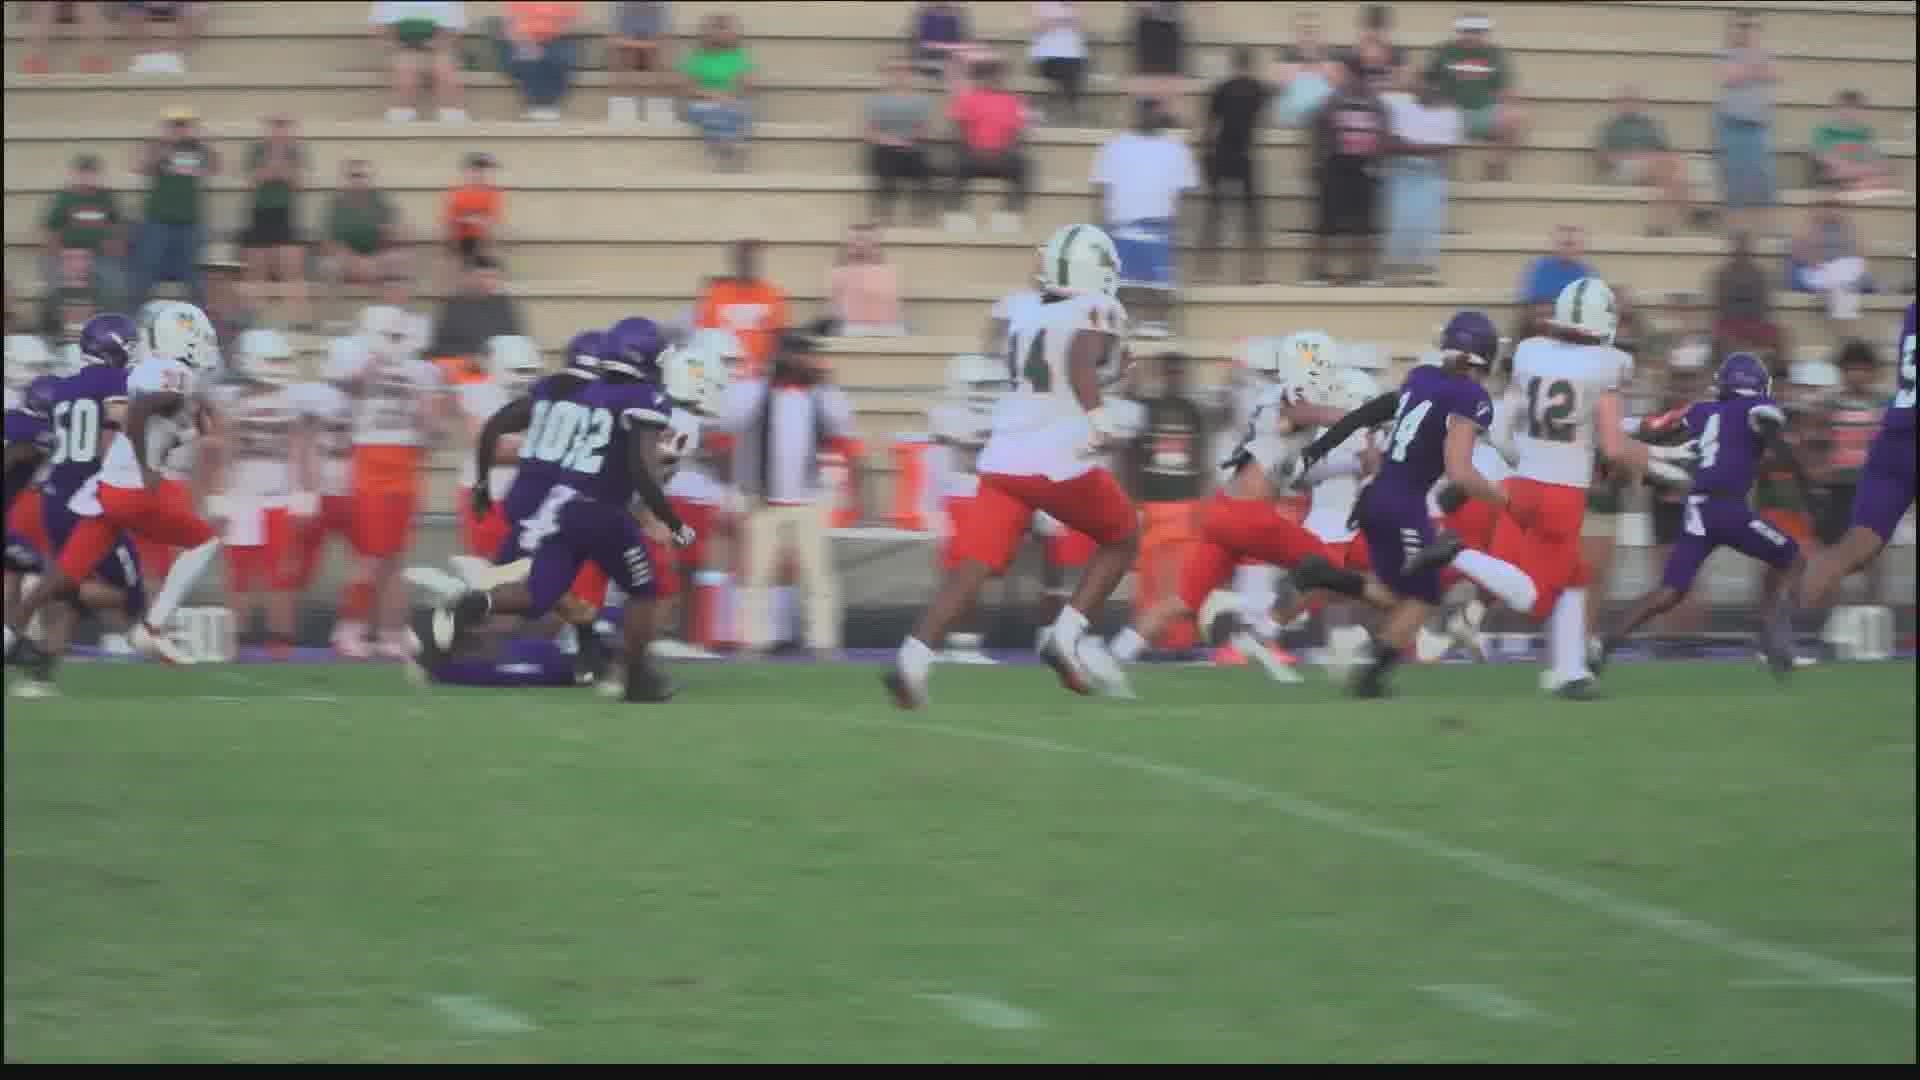 The play of the week was at Fletcher High. But it was Mandarin player Kieren Jackson with the Play of The Week.